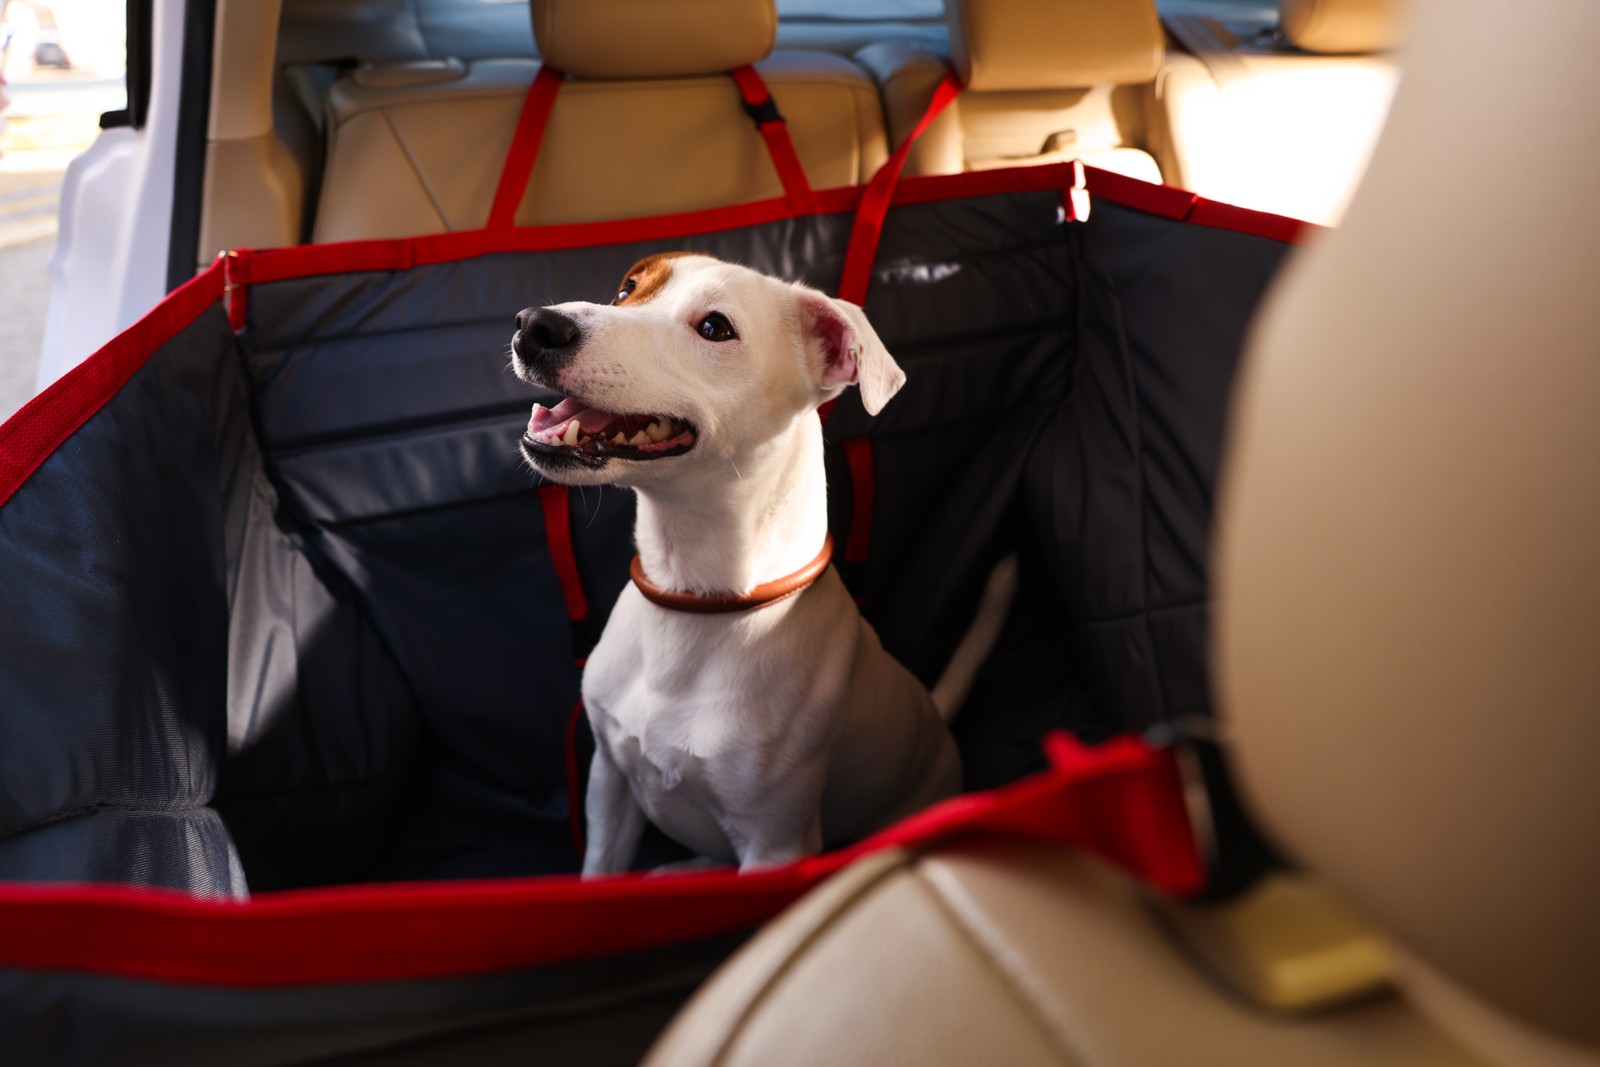 Photo of cute Jack Russel Terrier dog in bag carrier inside car. Pet accessory